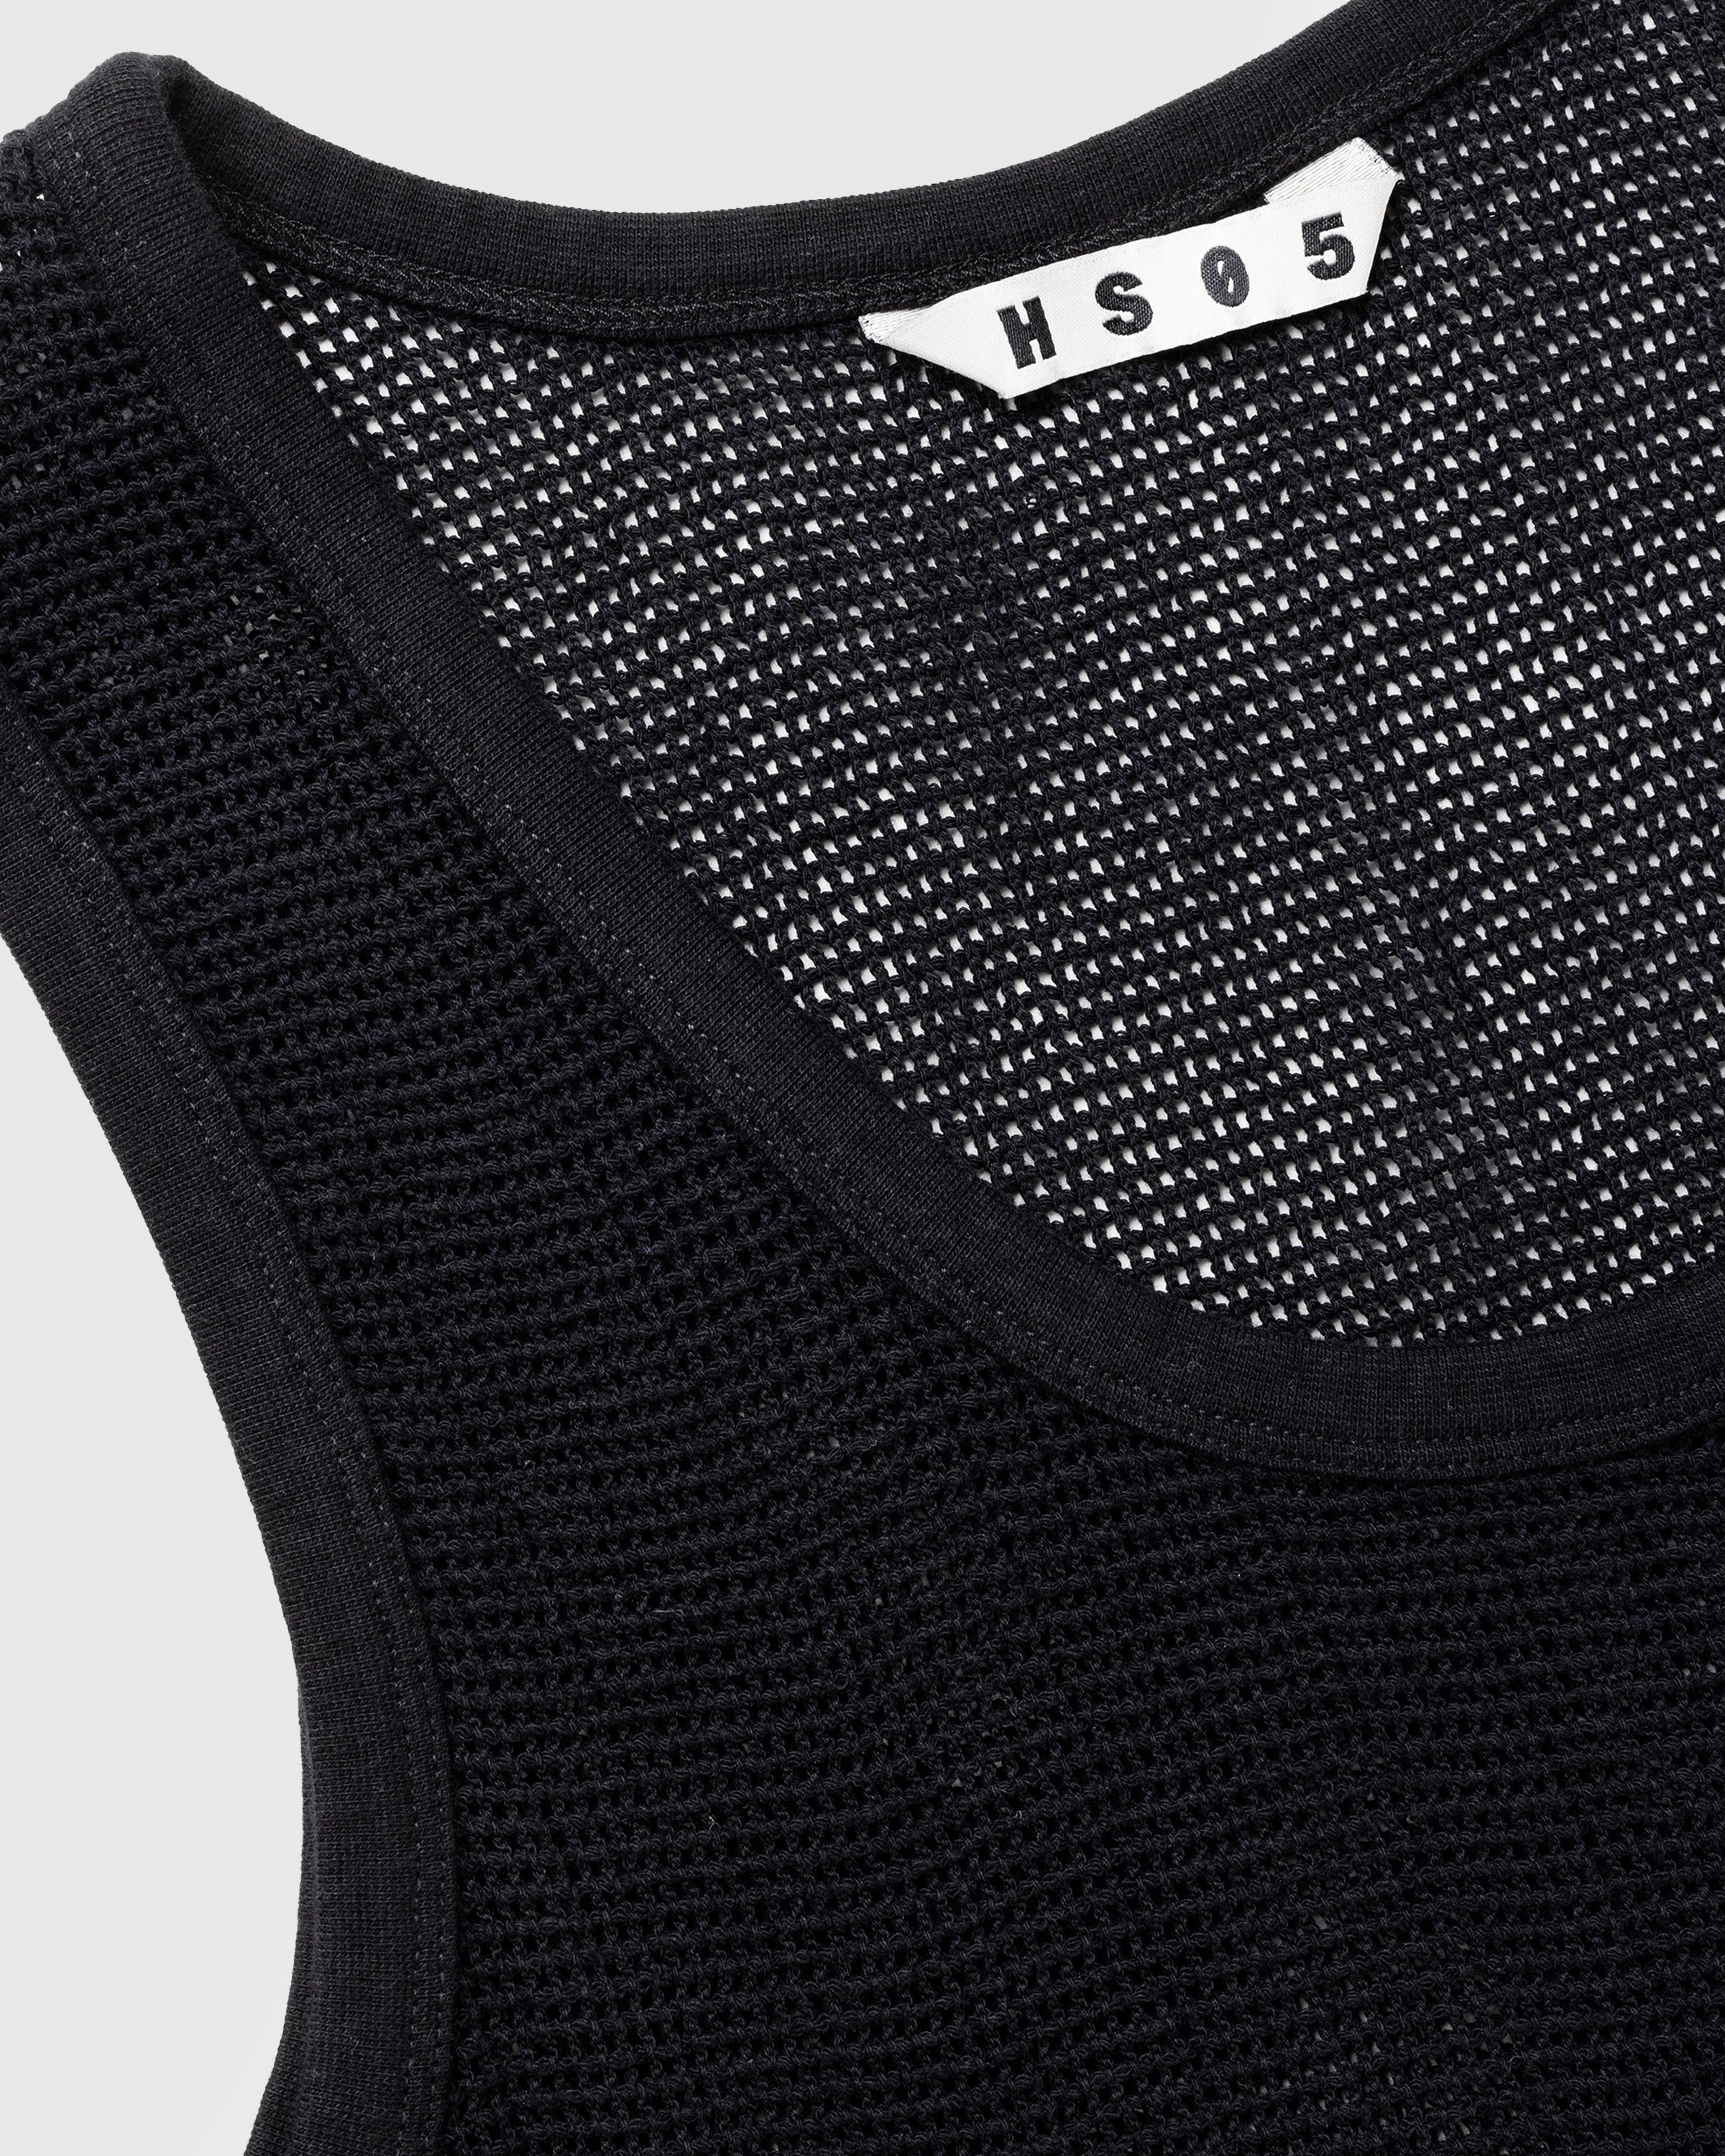 Highsnobiety HS05 - Pigment Dyed Cotton Mesh Tank Top Black - Clothing -  - Image 8